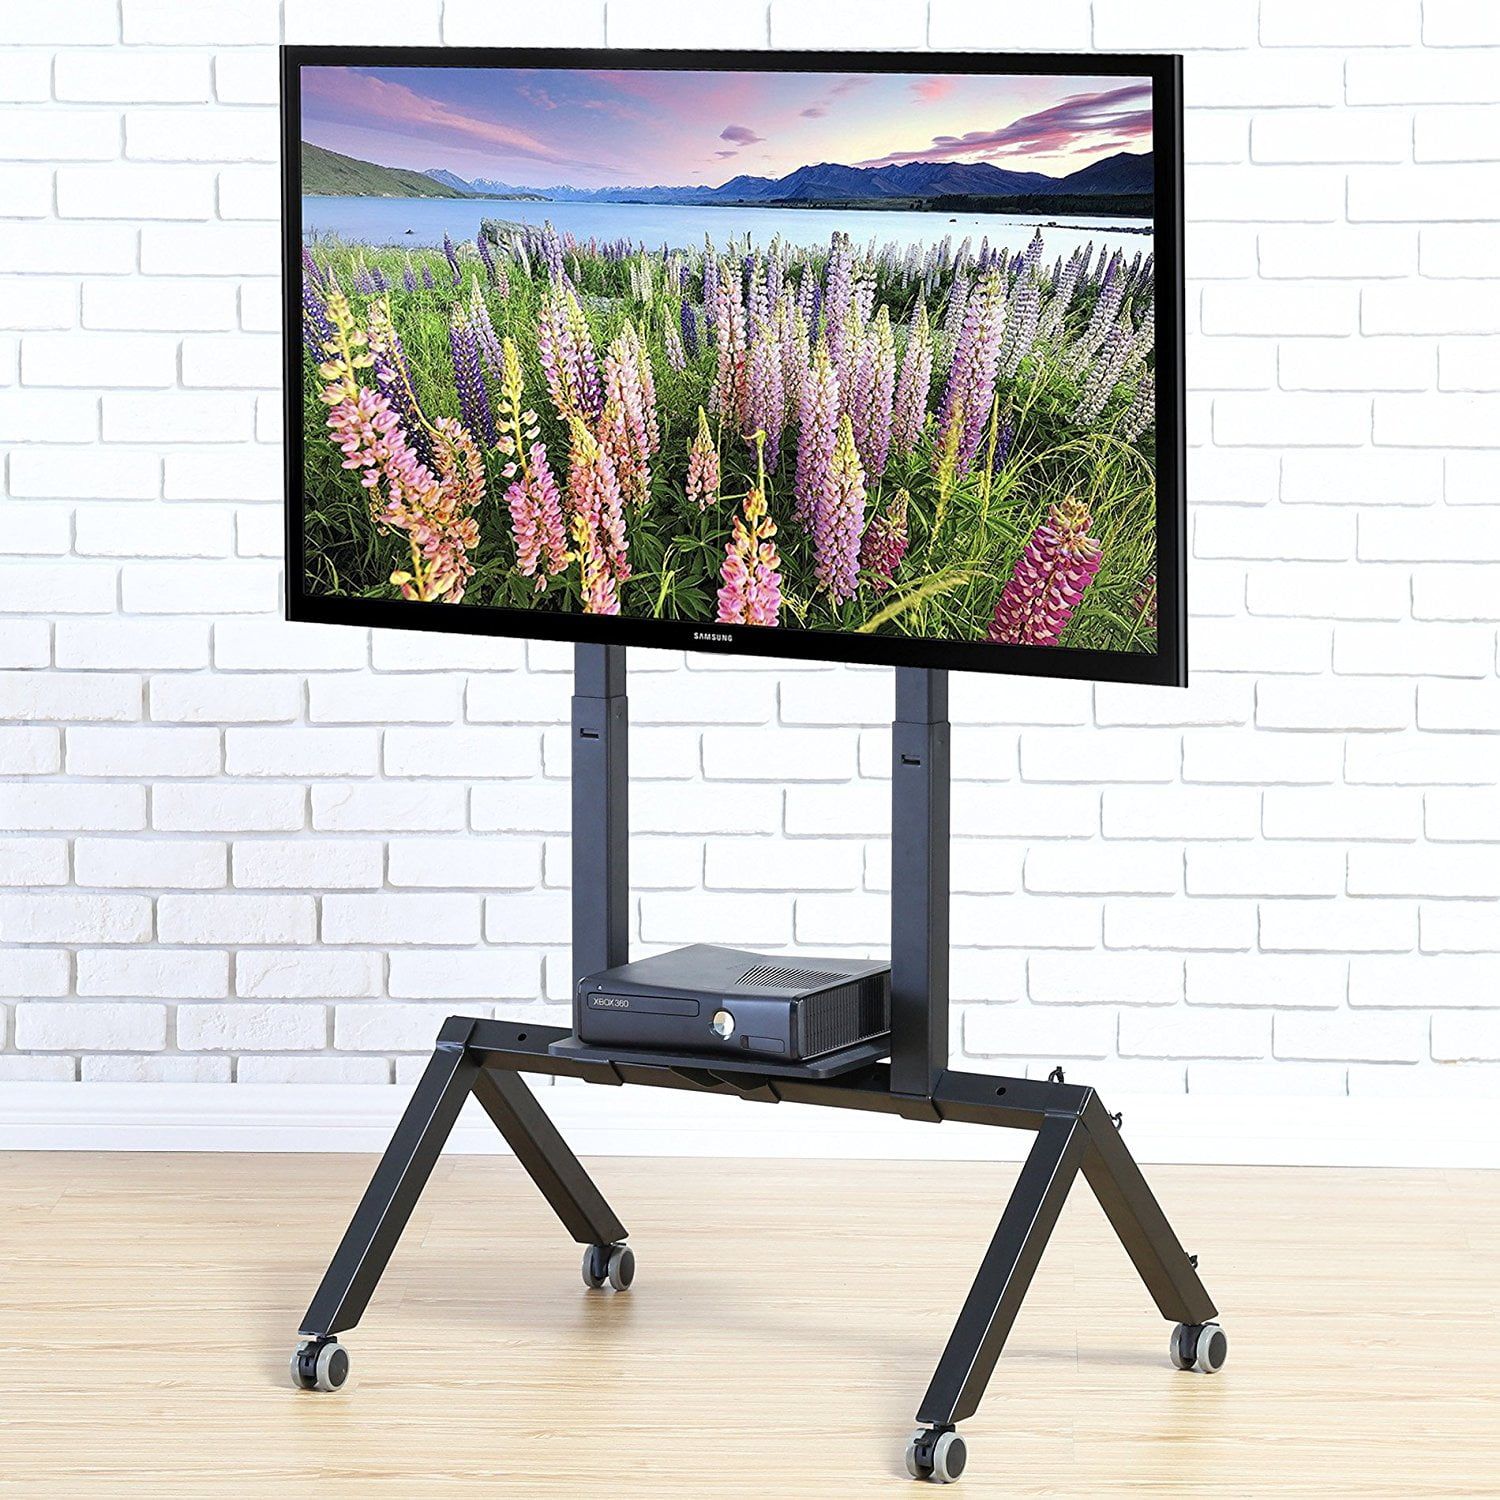 Fitueyes Mobile Tv Cart For Lcd Led Plasma Flat Panel Tv Stand With Inside Foldable Portable Adjustable Tv Stands (Gallery 20 of 20)